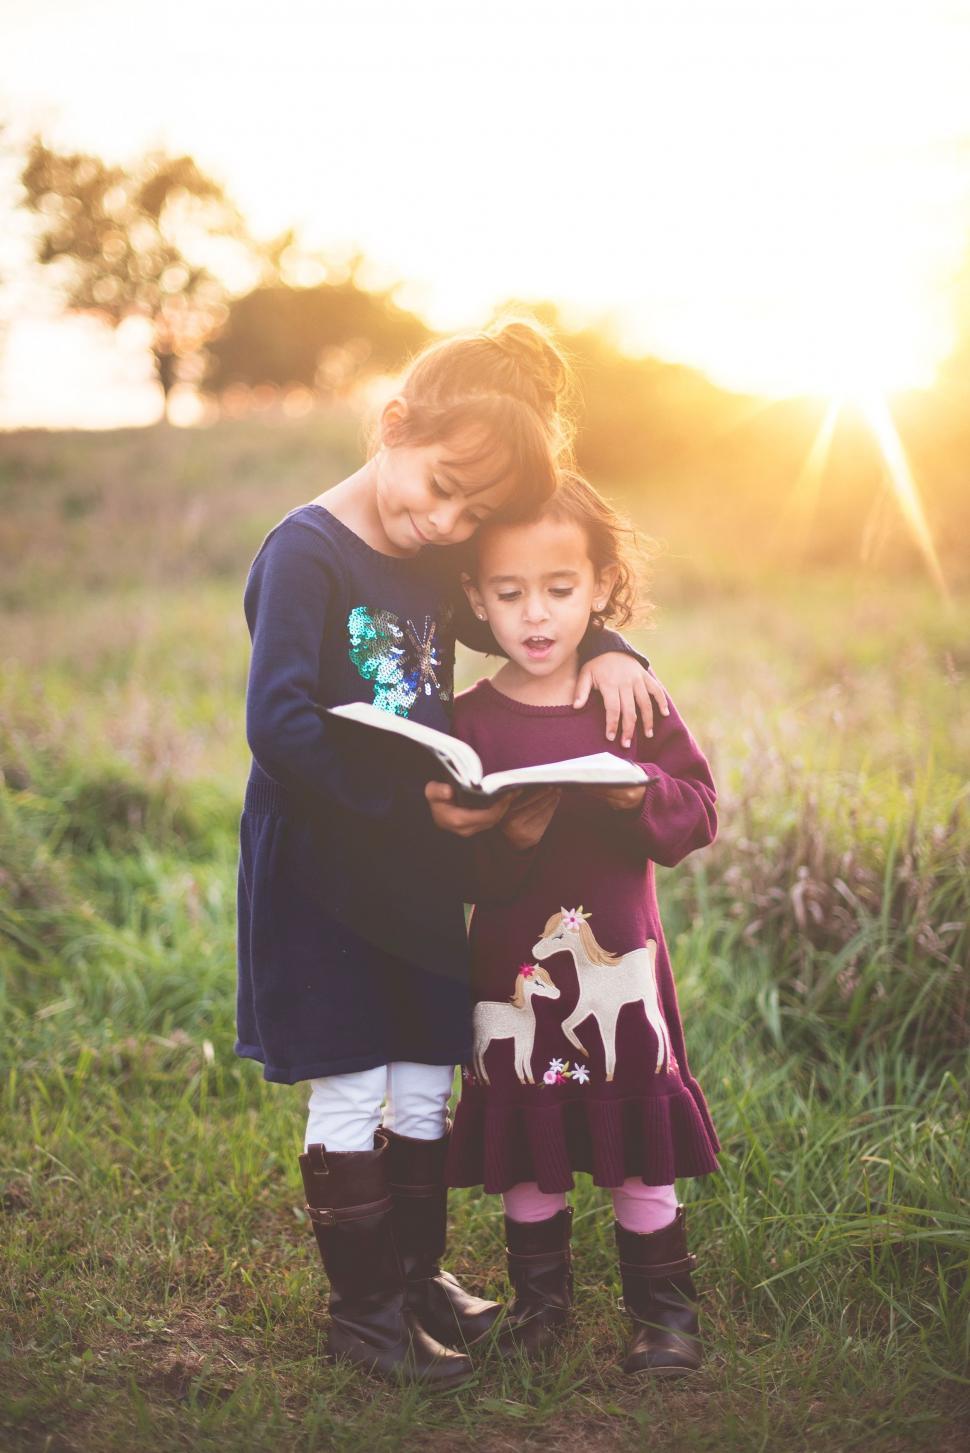 Free Image of Two Little Girls Standing in a Field With a Book 